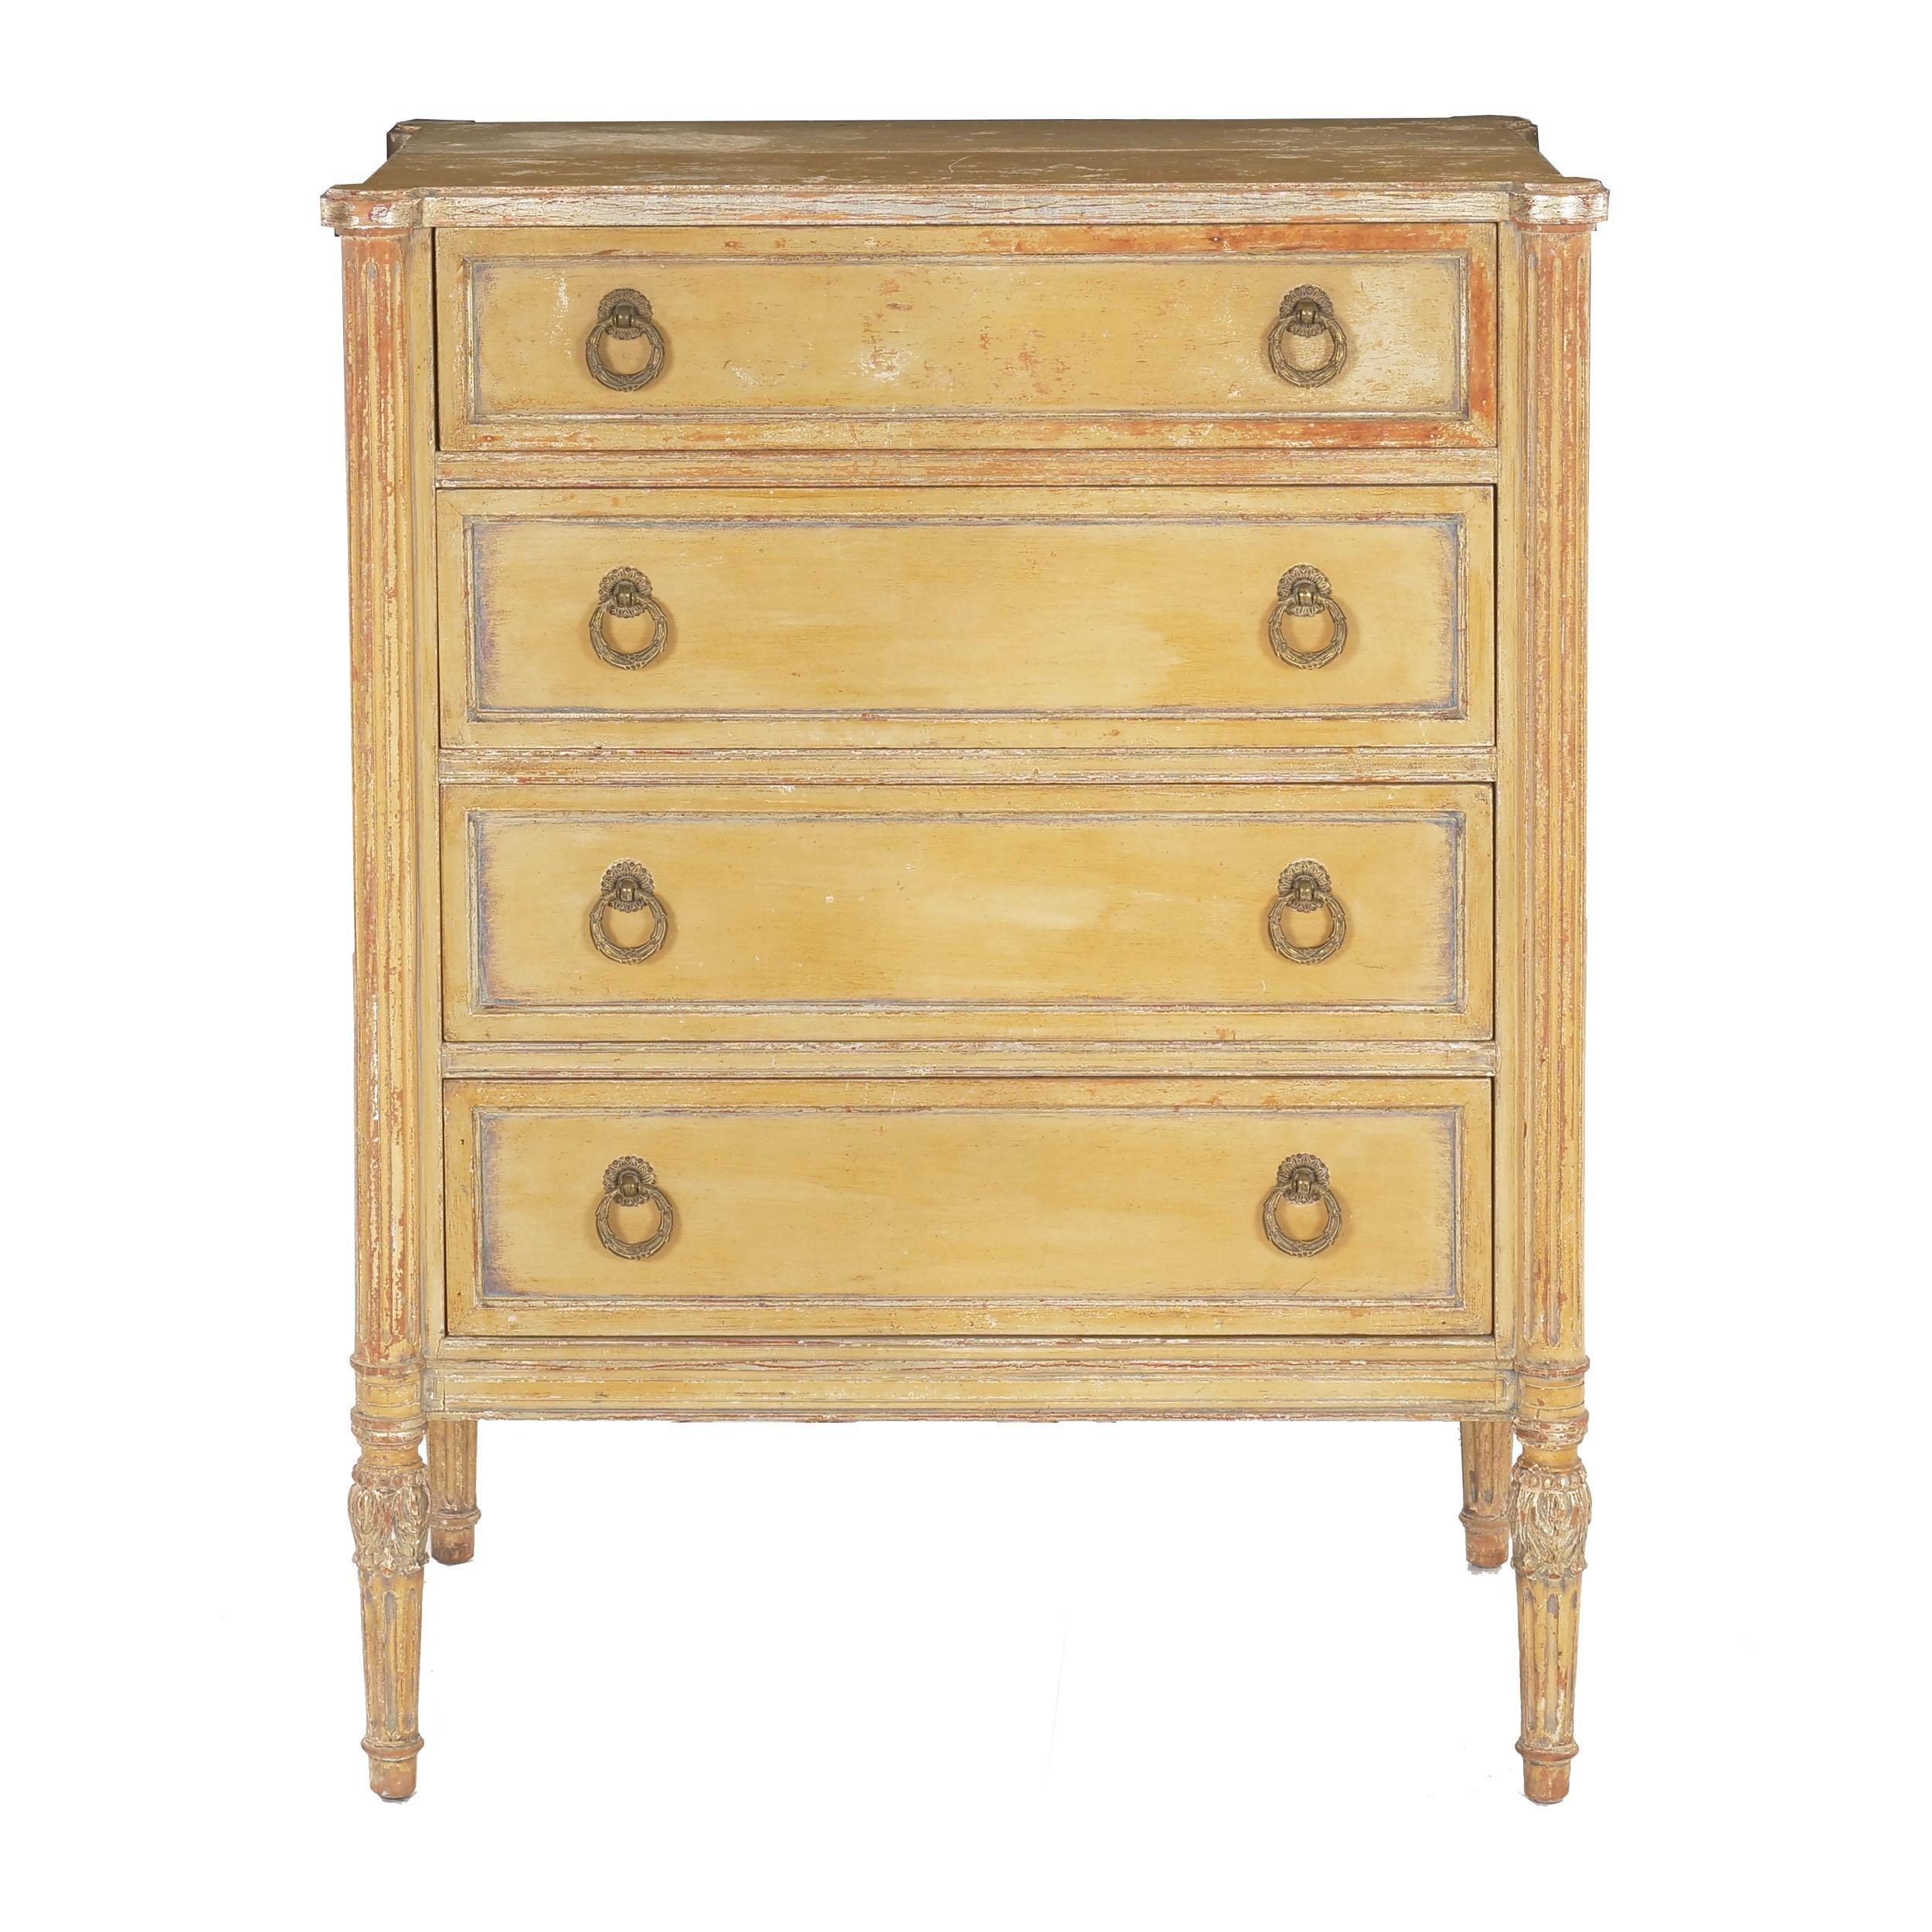 Hand-Painted French Louis XVI Style Antique Painted Desk over Chest of Drawers circa 1940s